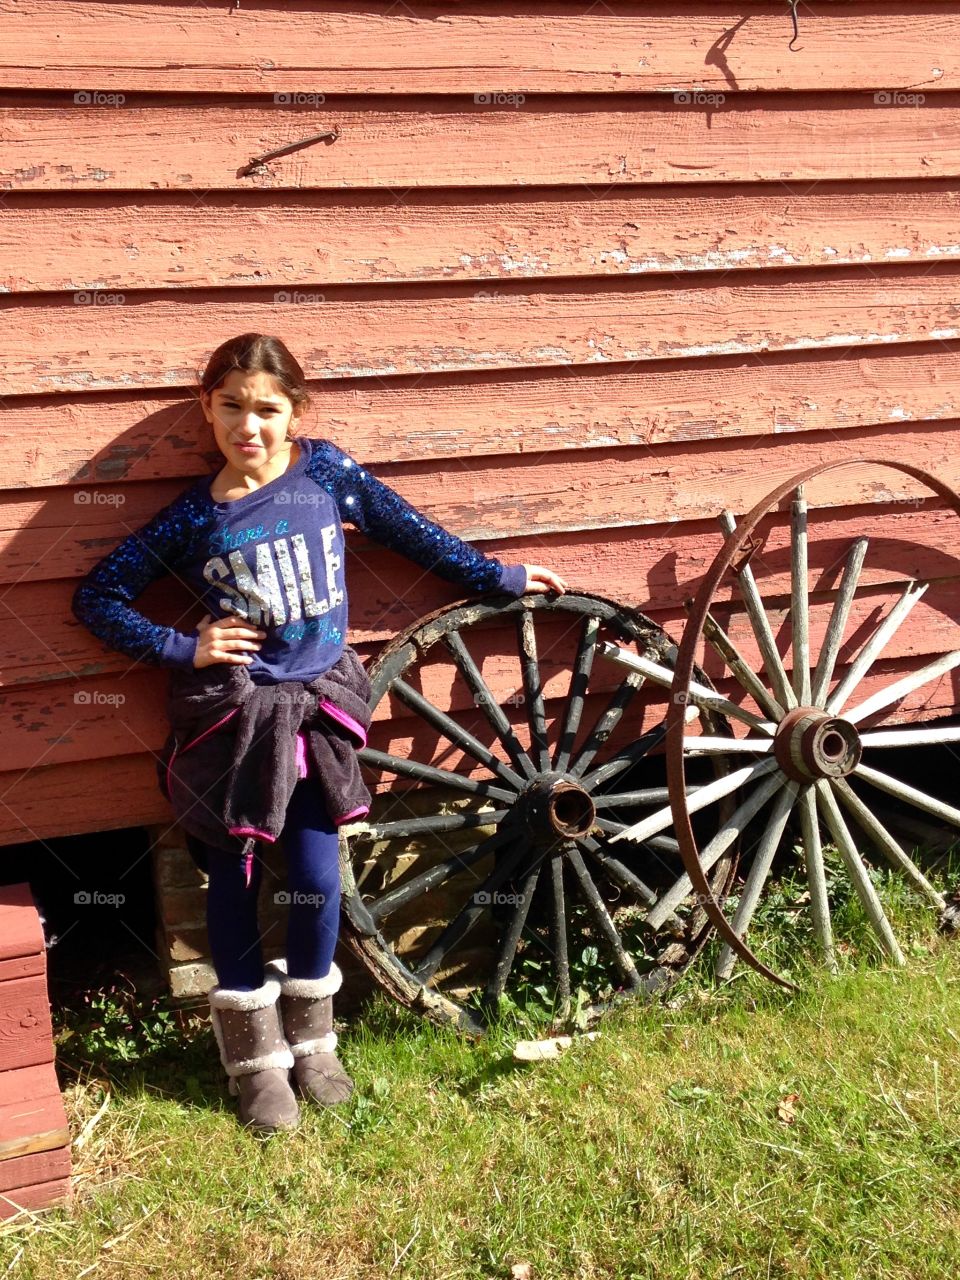 Wagon wheels by the Red Barn